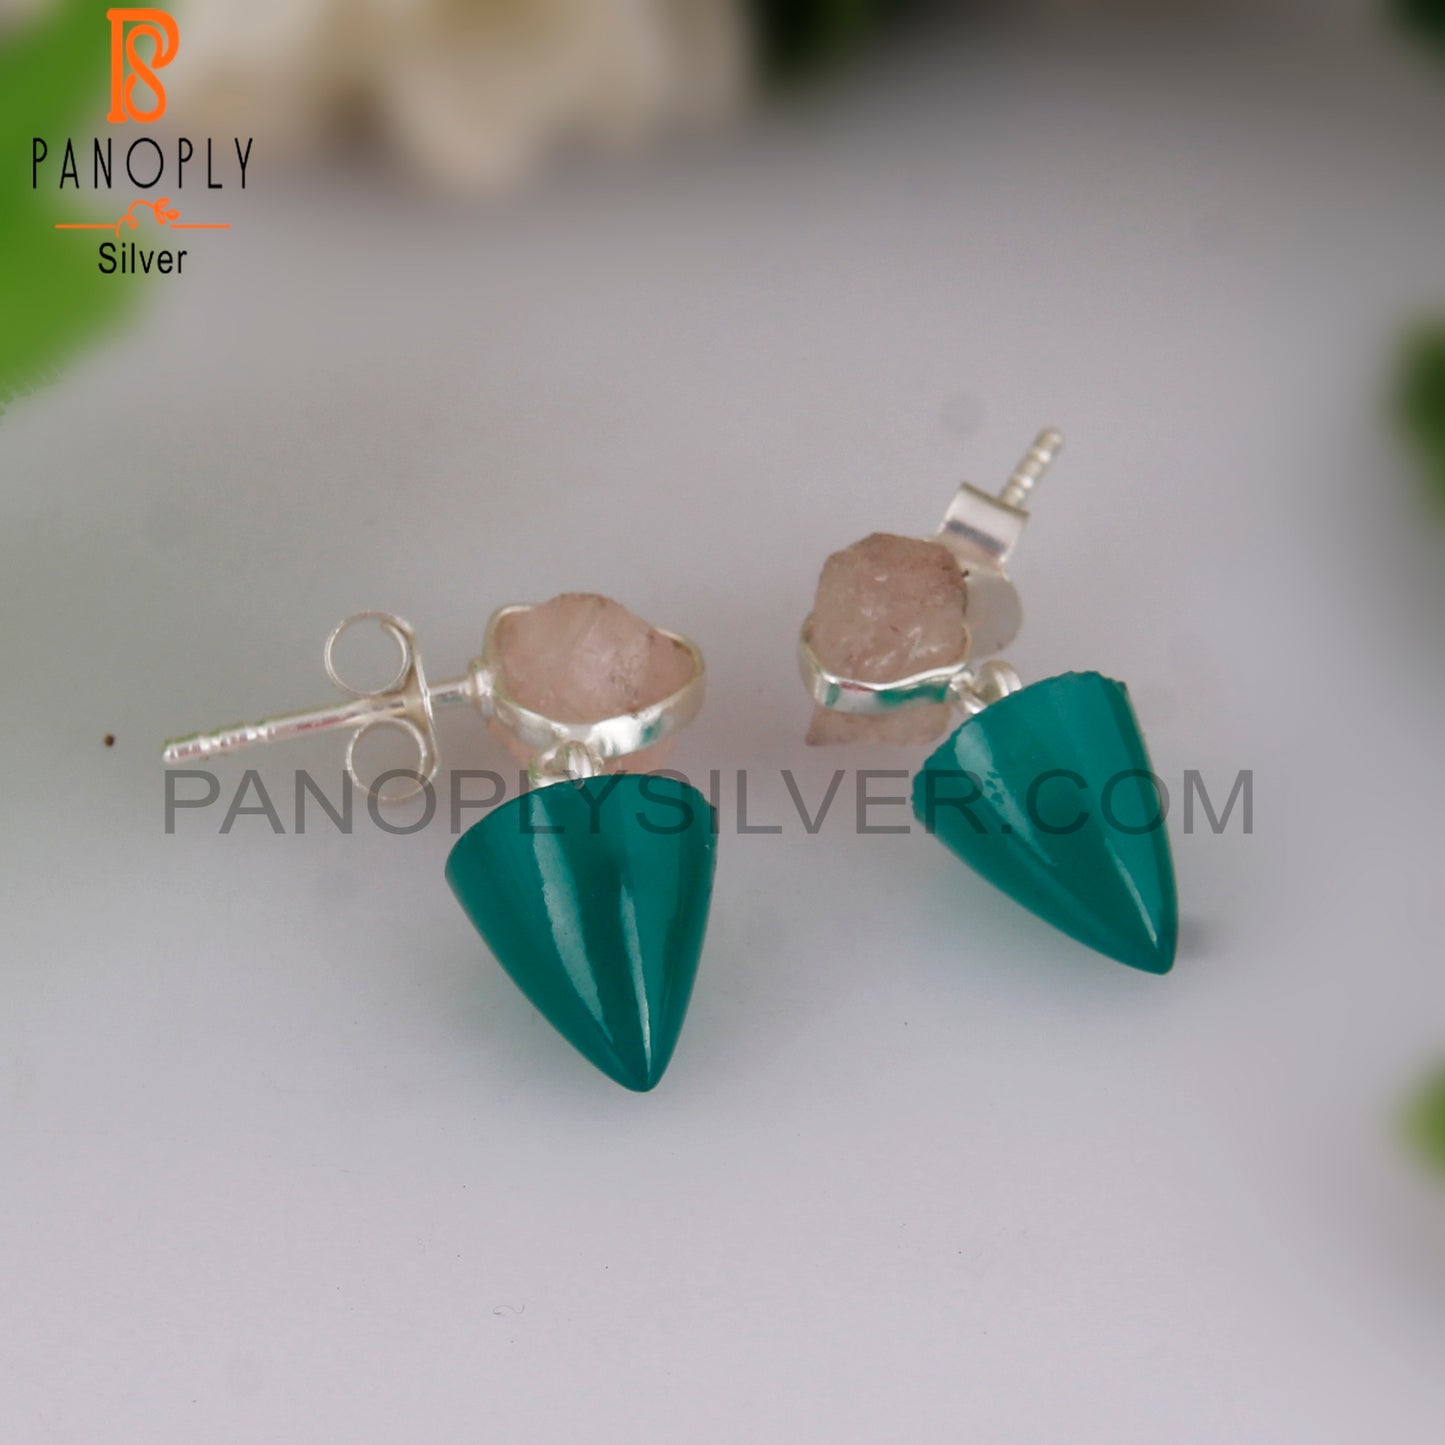 Fine 925 Sterling Silver Handmade Beautiful Cone Shaped Double Stone Designer In The Natural Rose Quartz And Green Onyx Gemstone Set Dangle Earrings Jewelry